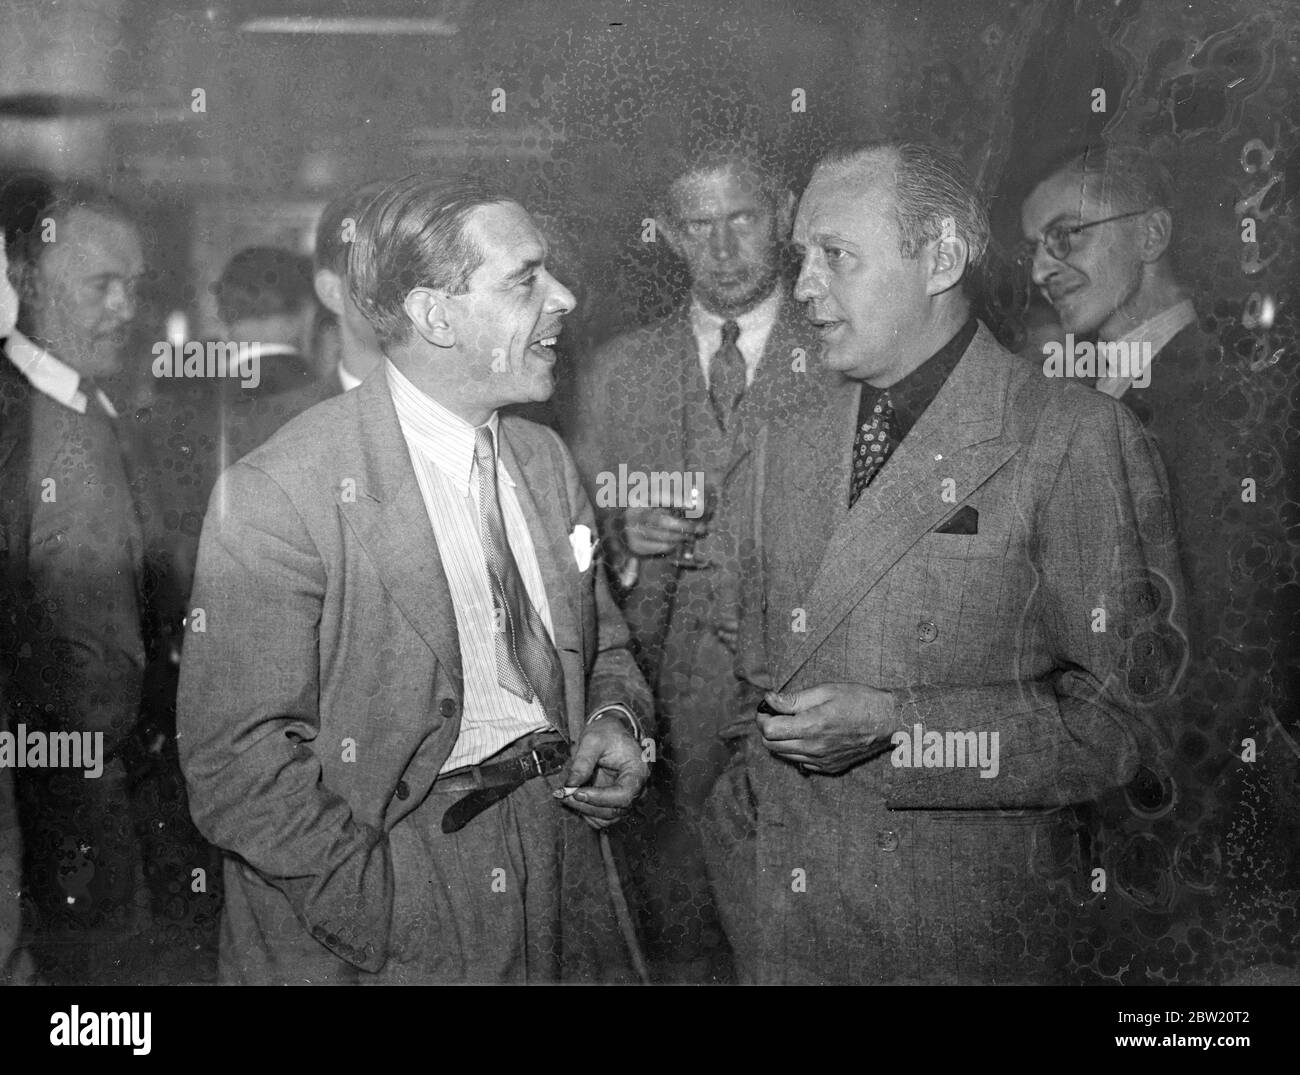 Jack Benny (right), one of the highest-paid radio comedians in America, who is spending a short holiday in England, is to give a broadcast from the BBC without fee. He was born in Waukegan, Illinois and began his career on the vaudeville stage. He is discussing his broadcast with John Watt, newly appointed BBC variety director, at his London hotel. 21 July 1937 Stock Photo